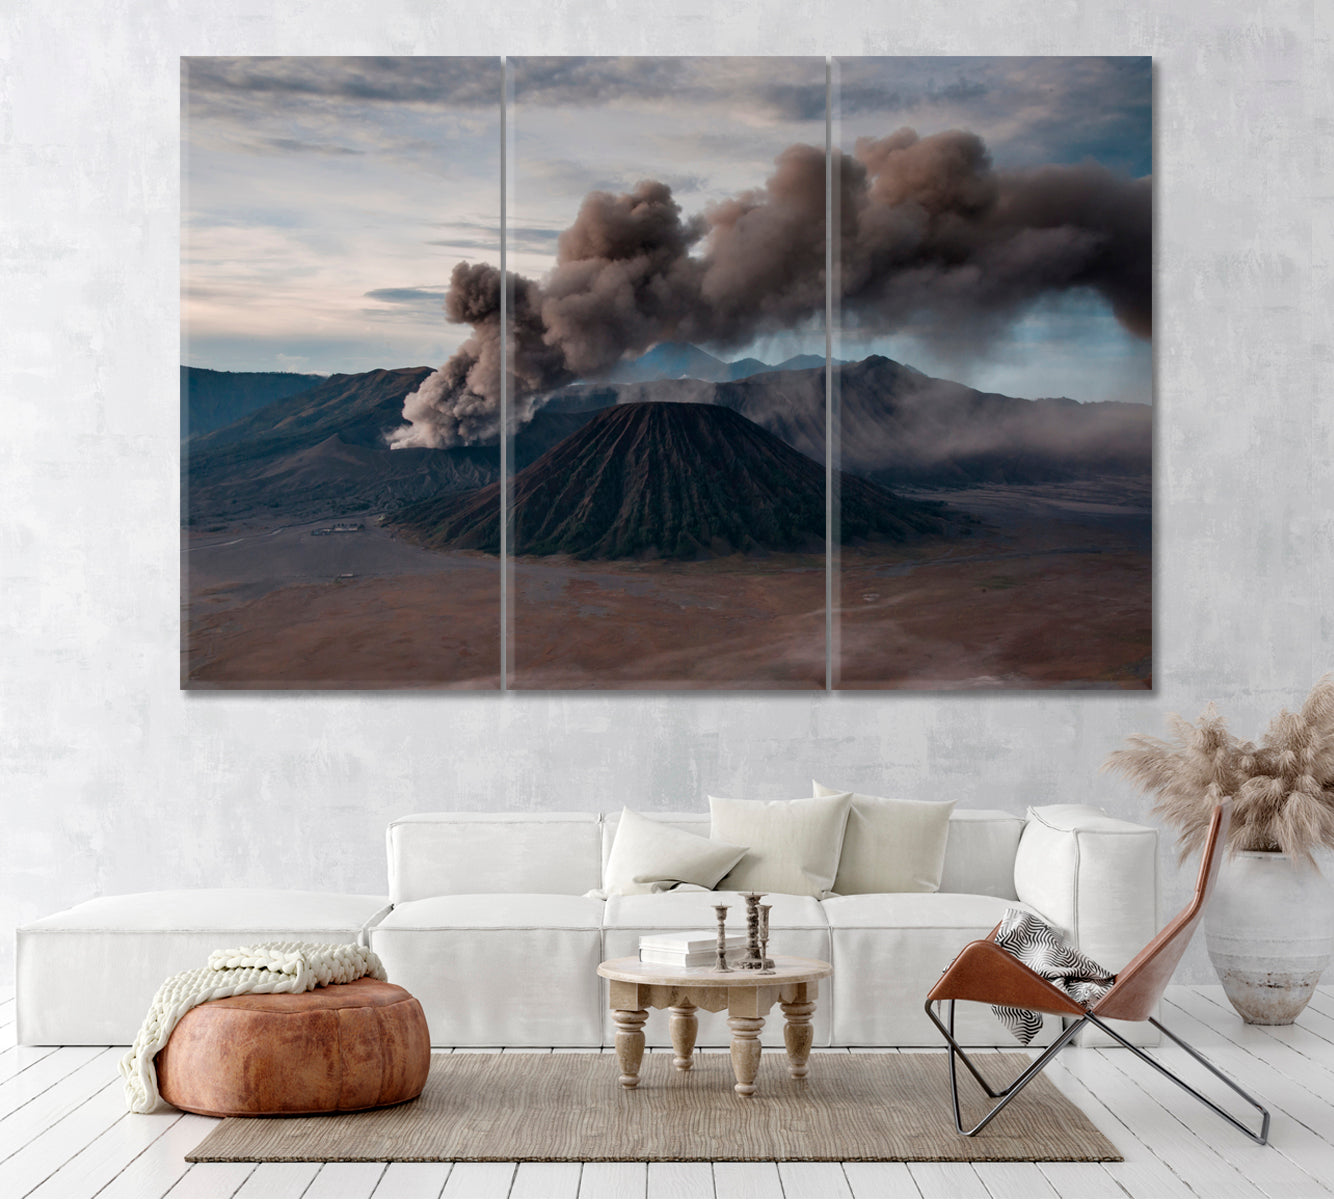 Mount Bromo Eruption Java Indonesia Canvas Print ArtLexy 3 Panels 36"x24" inches 